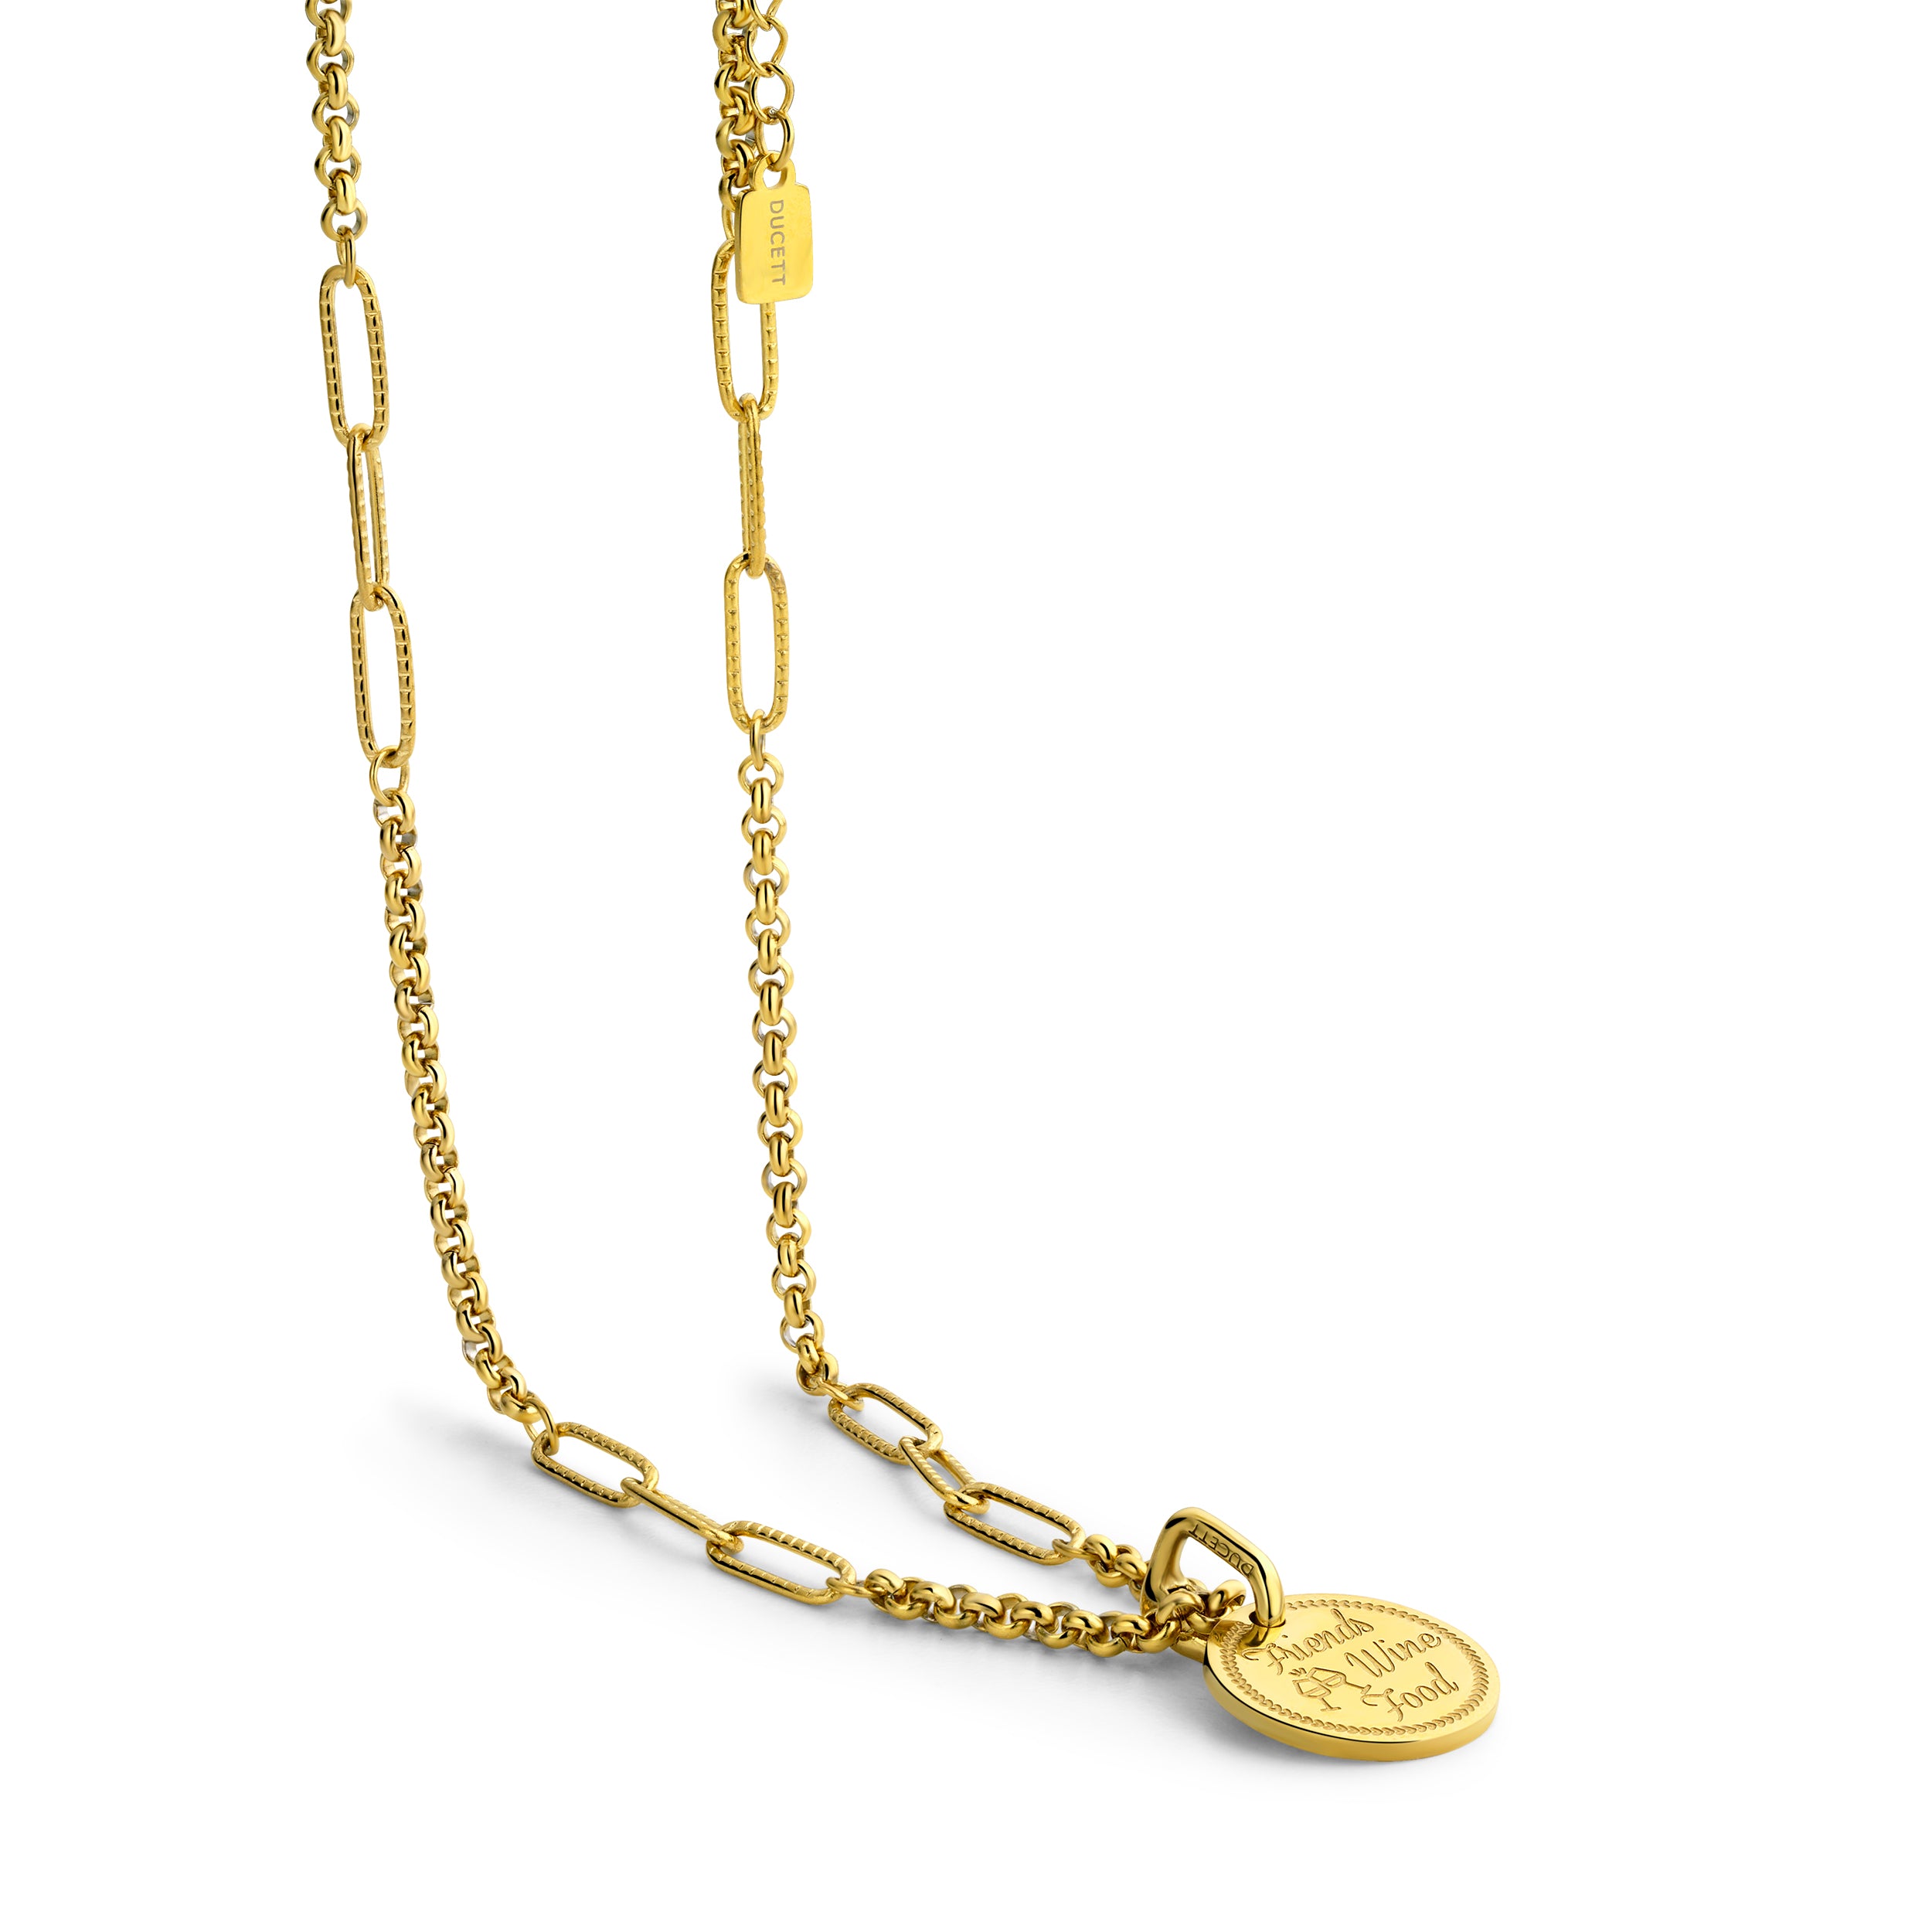 Passion necklace gold